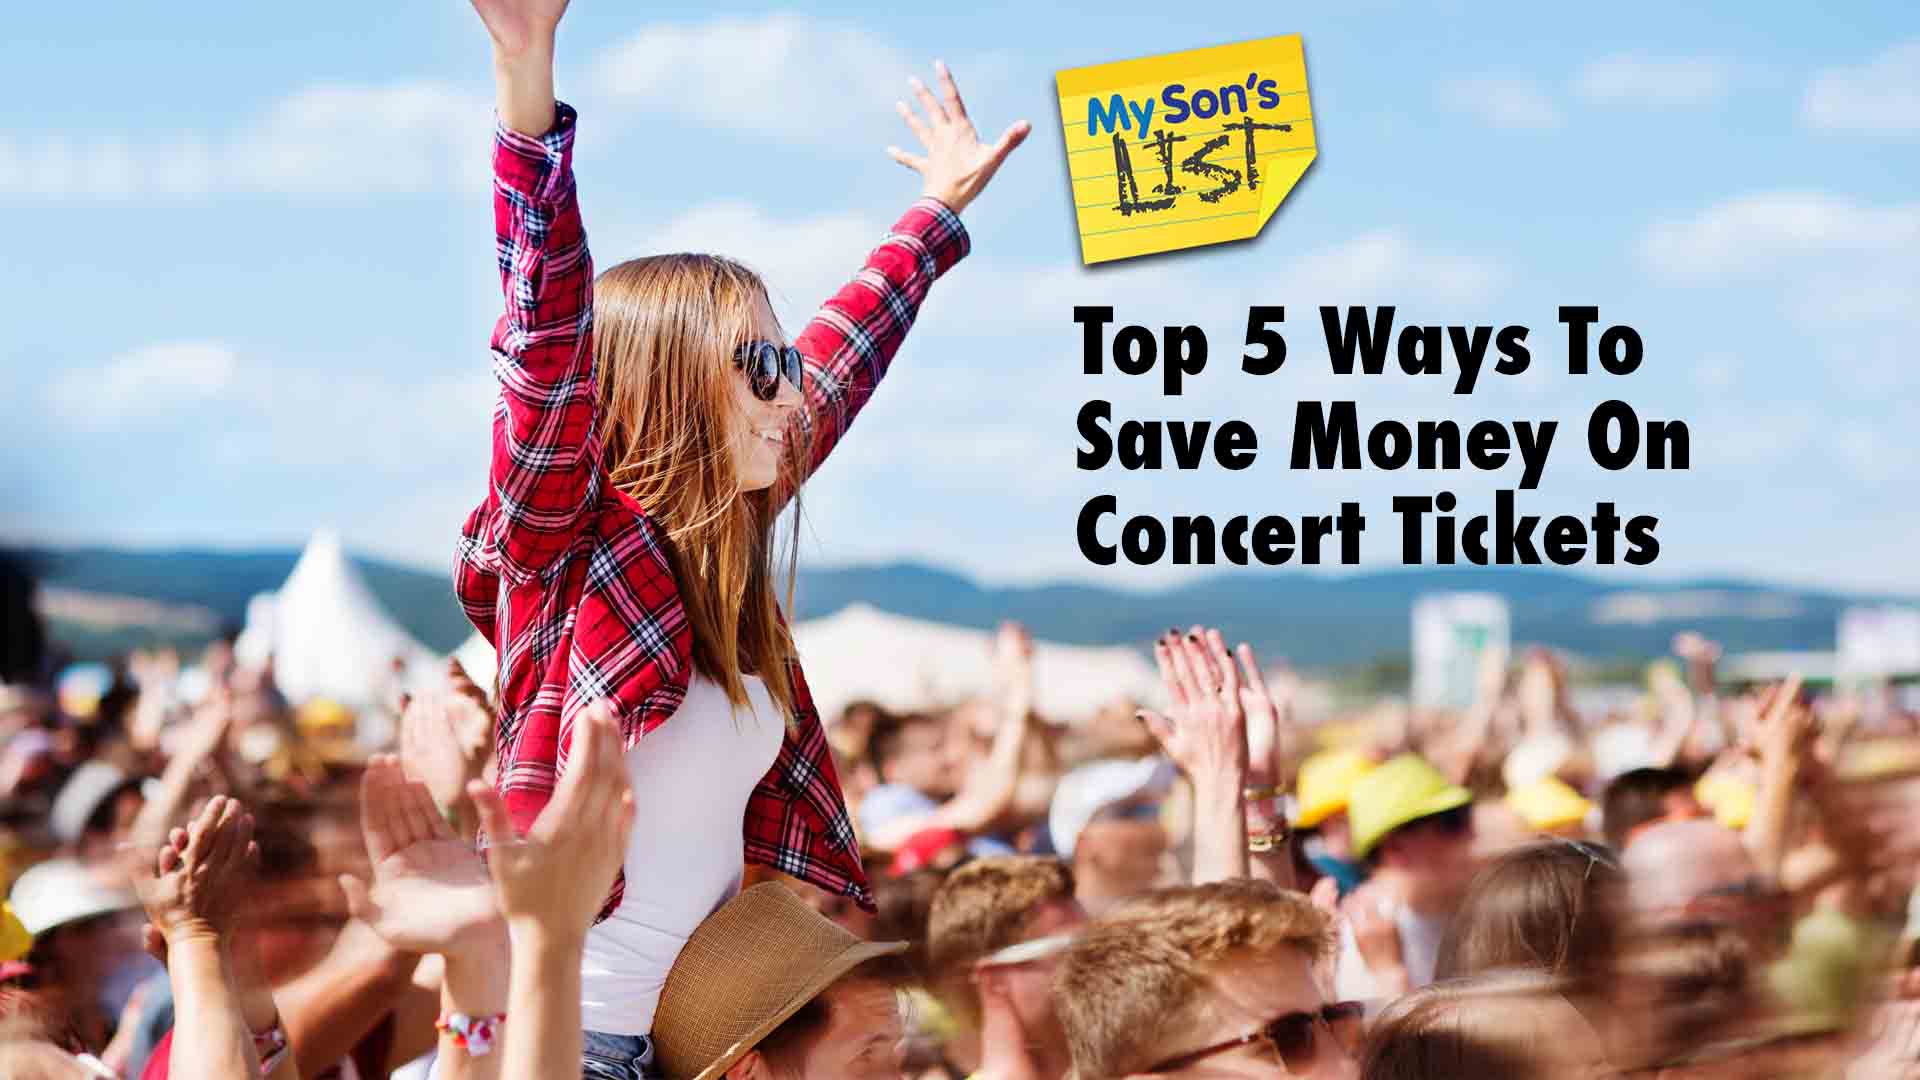 My Sons List of Top 5 Ways to Save Money on Concert Tickets